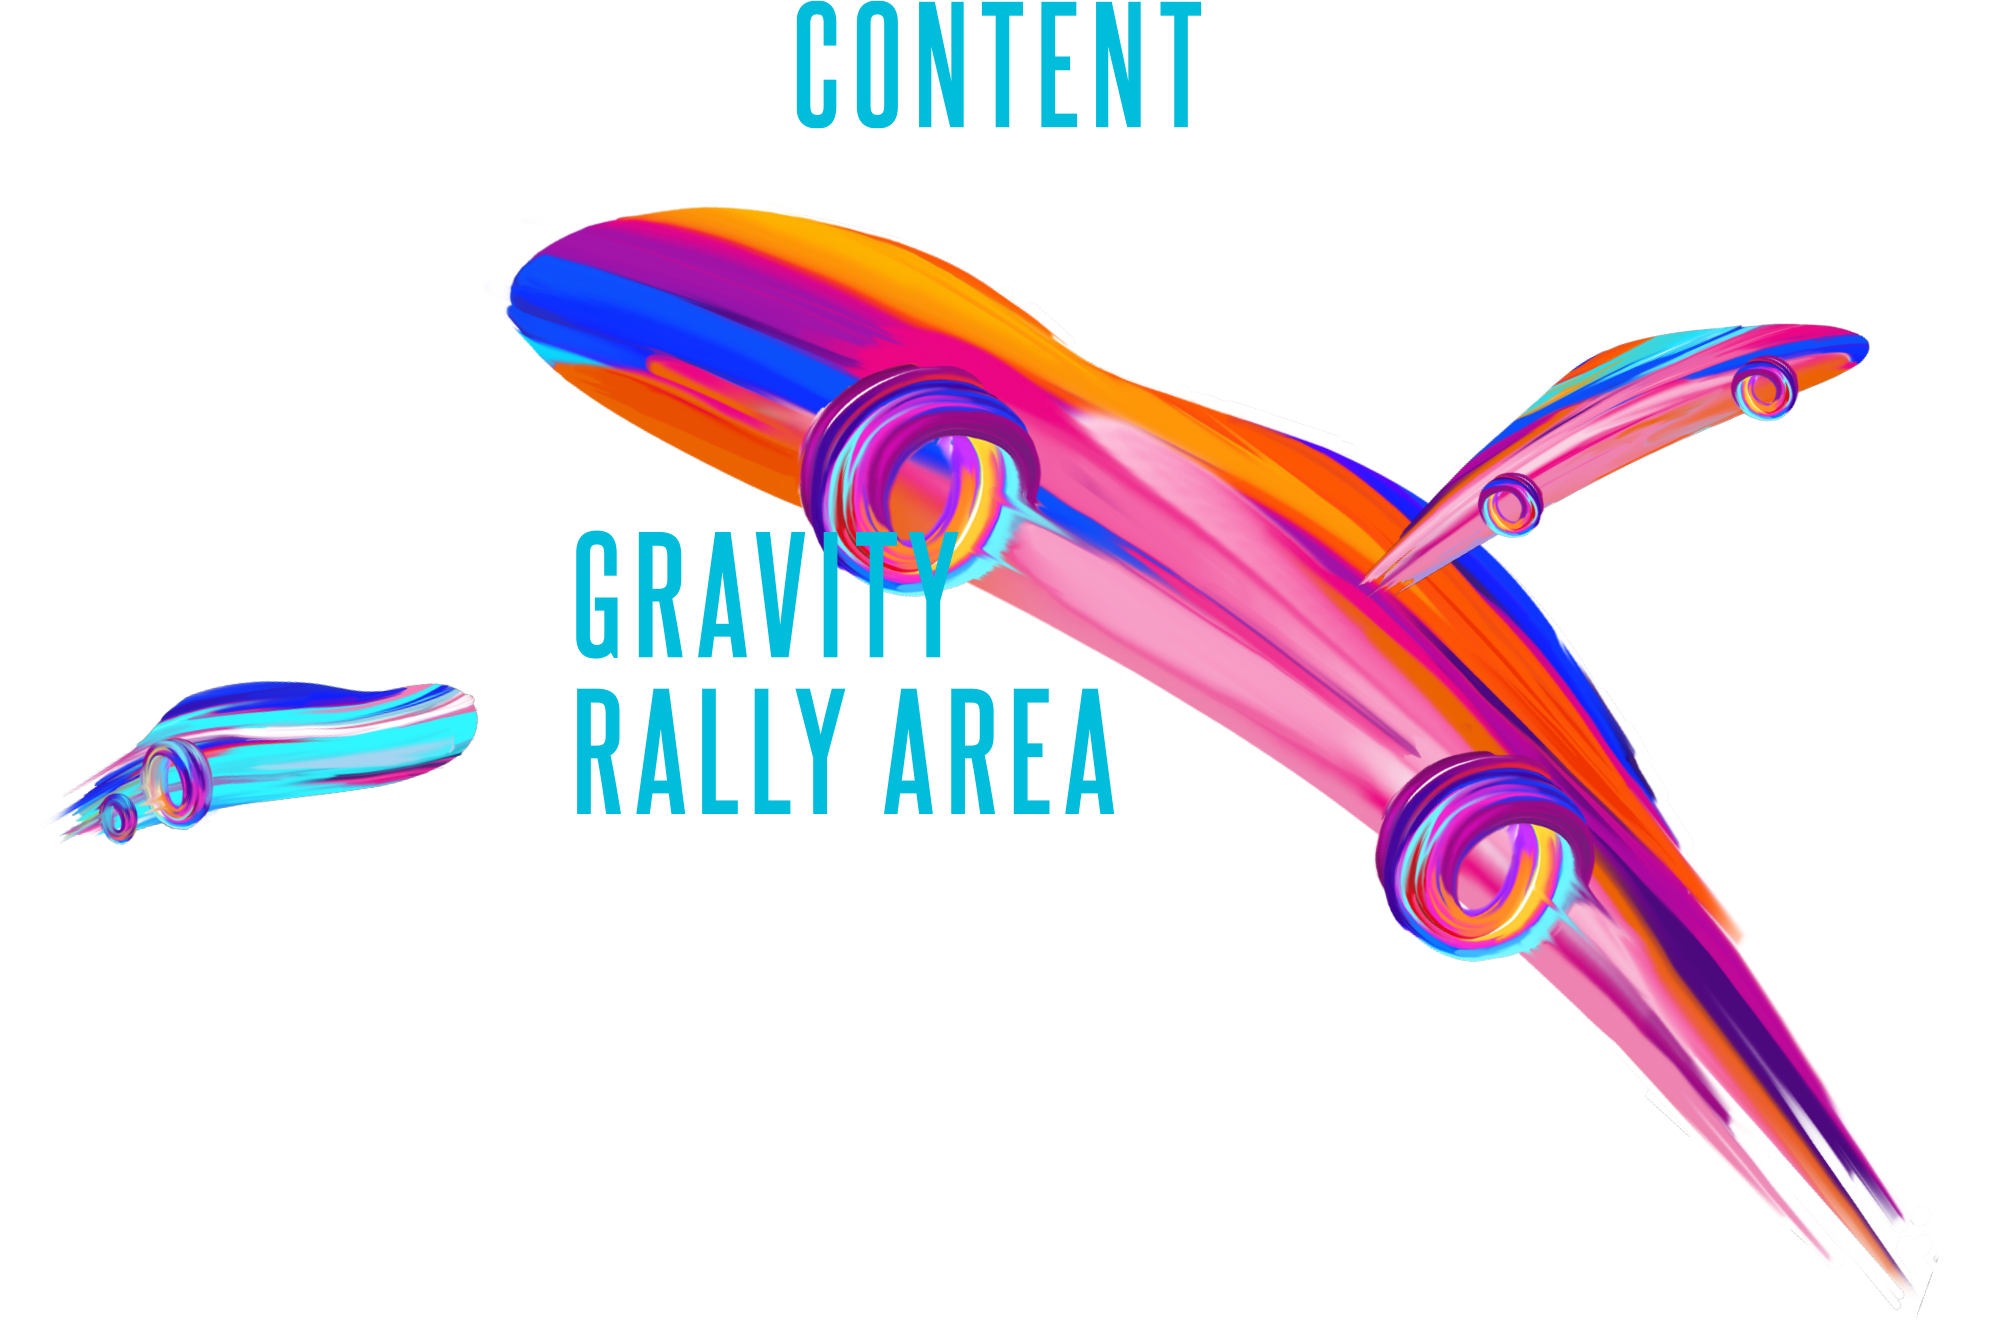 CONTENT GRAVITY RALLY AREA